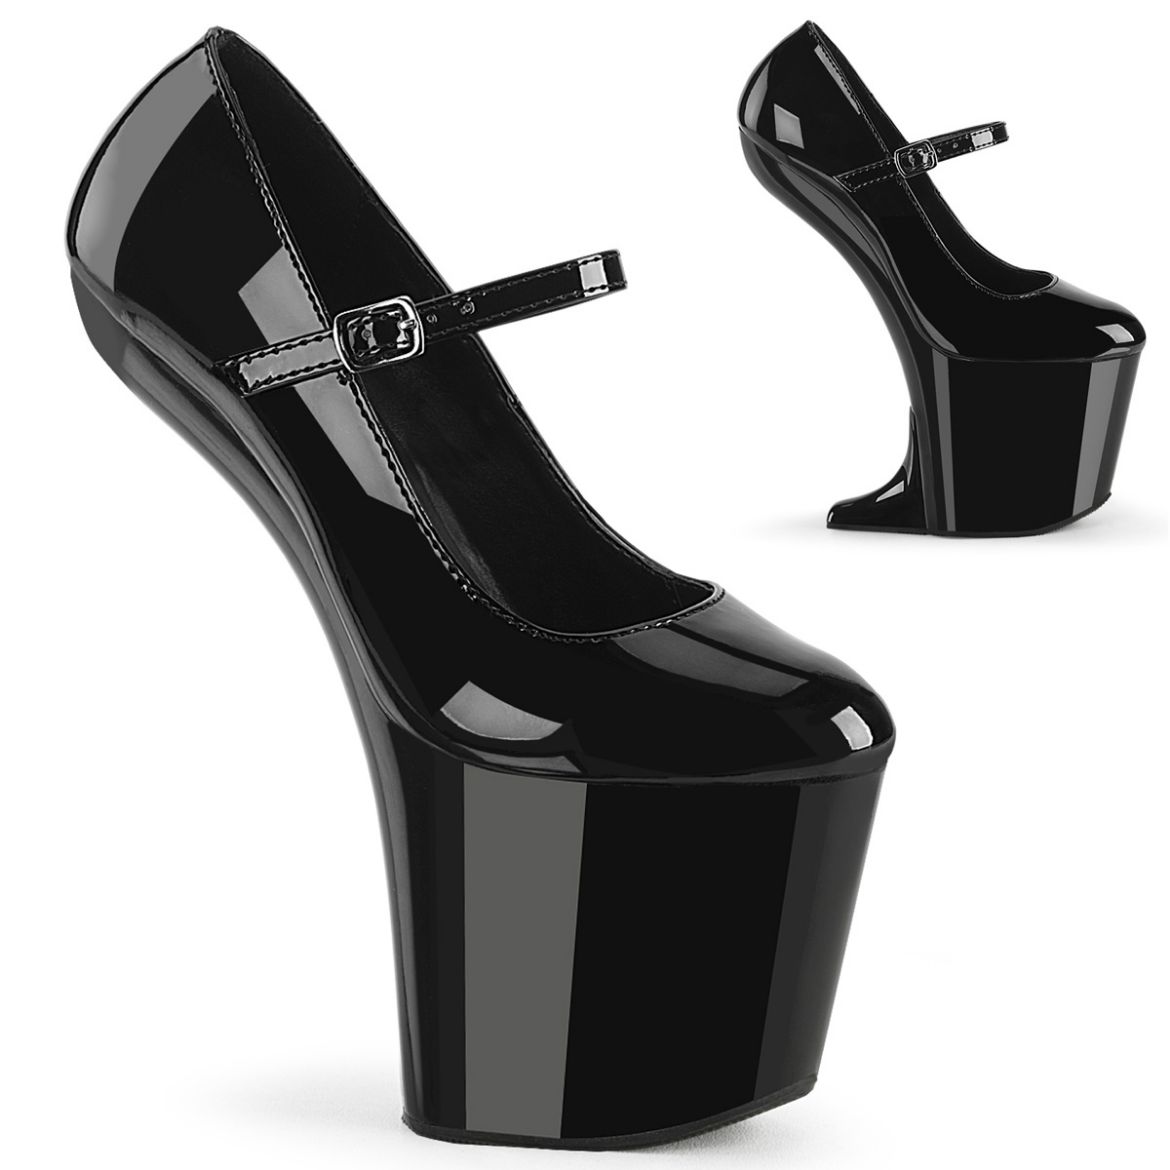 Product image of Pleaser CRAZE-880 Blk Pat/Blk 8 Inch Heelless 3 Inch PF Mary Jane Pump